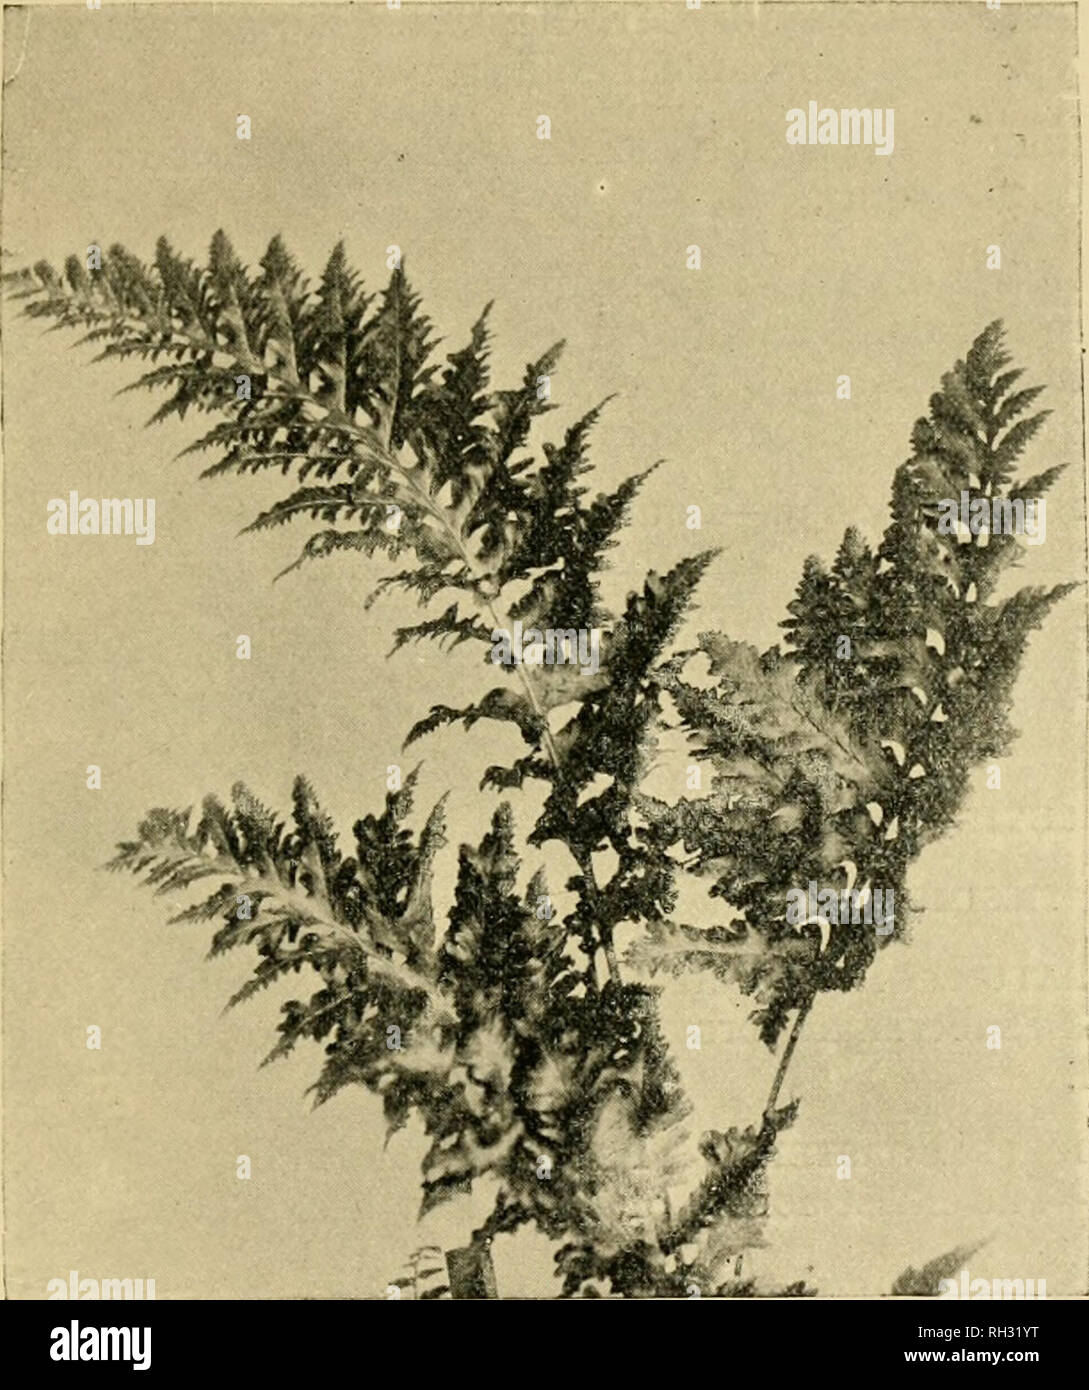 . British ferns and their varieties. Ferns. THE POLYPODIES 179. Fig. 202. P. V. cainb. Hadwinii. C. Barrowii, c. Hadwinii (Fig. 202), c. Oakley.e, c. Prestonii (Appendix No. XLIV).—These are all quite distinct forms of Cam- briciim, and very beautiful ; Barroimi is a robust grower with longer and more acutely pointed divisions than Cambricum, and Prestonii is much denser in make ; Hadwinii is a narrow form with blunter divisions, and Oakleyce a smaller grower than the others ; all are perfectly barren. CoRNUBiENSE.—Found in Cornwall by Mr. White and others, as a result of which it has been als Stock Photo